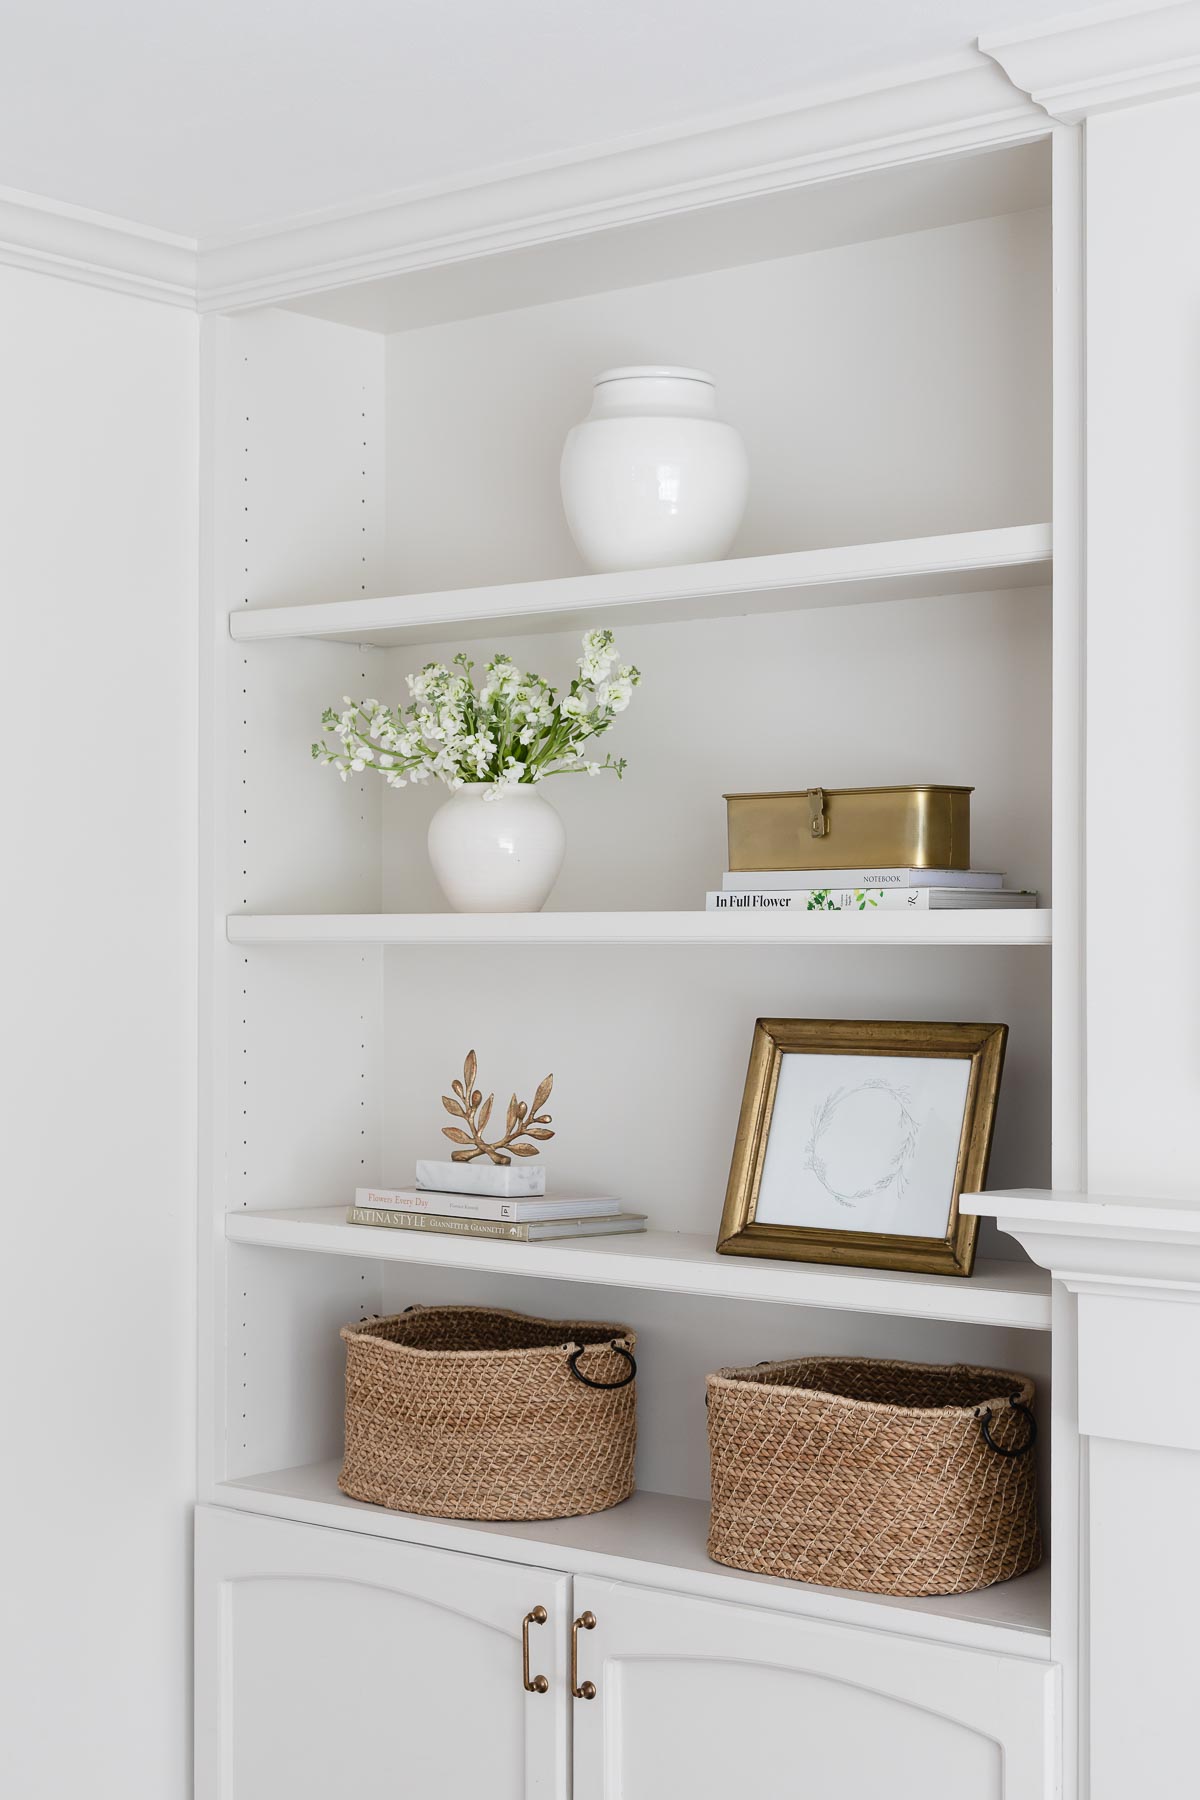 A living room with white shelves and baskets.